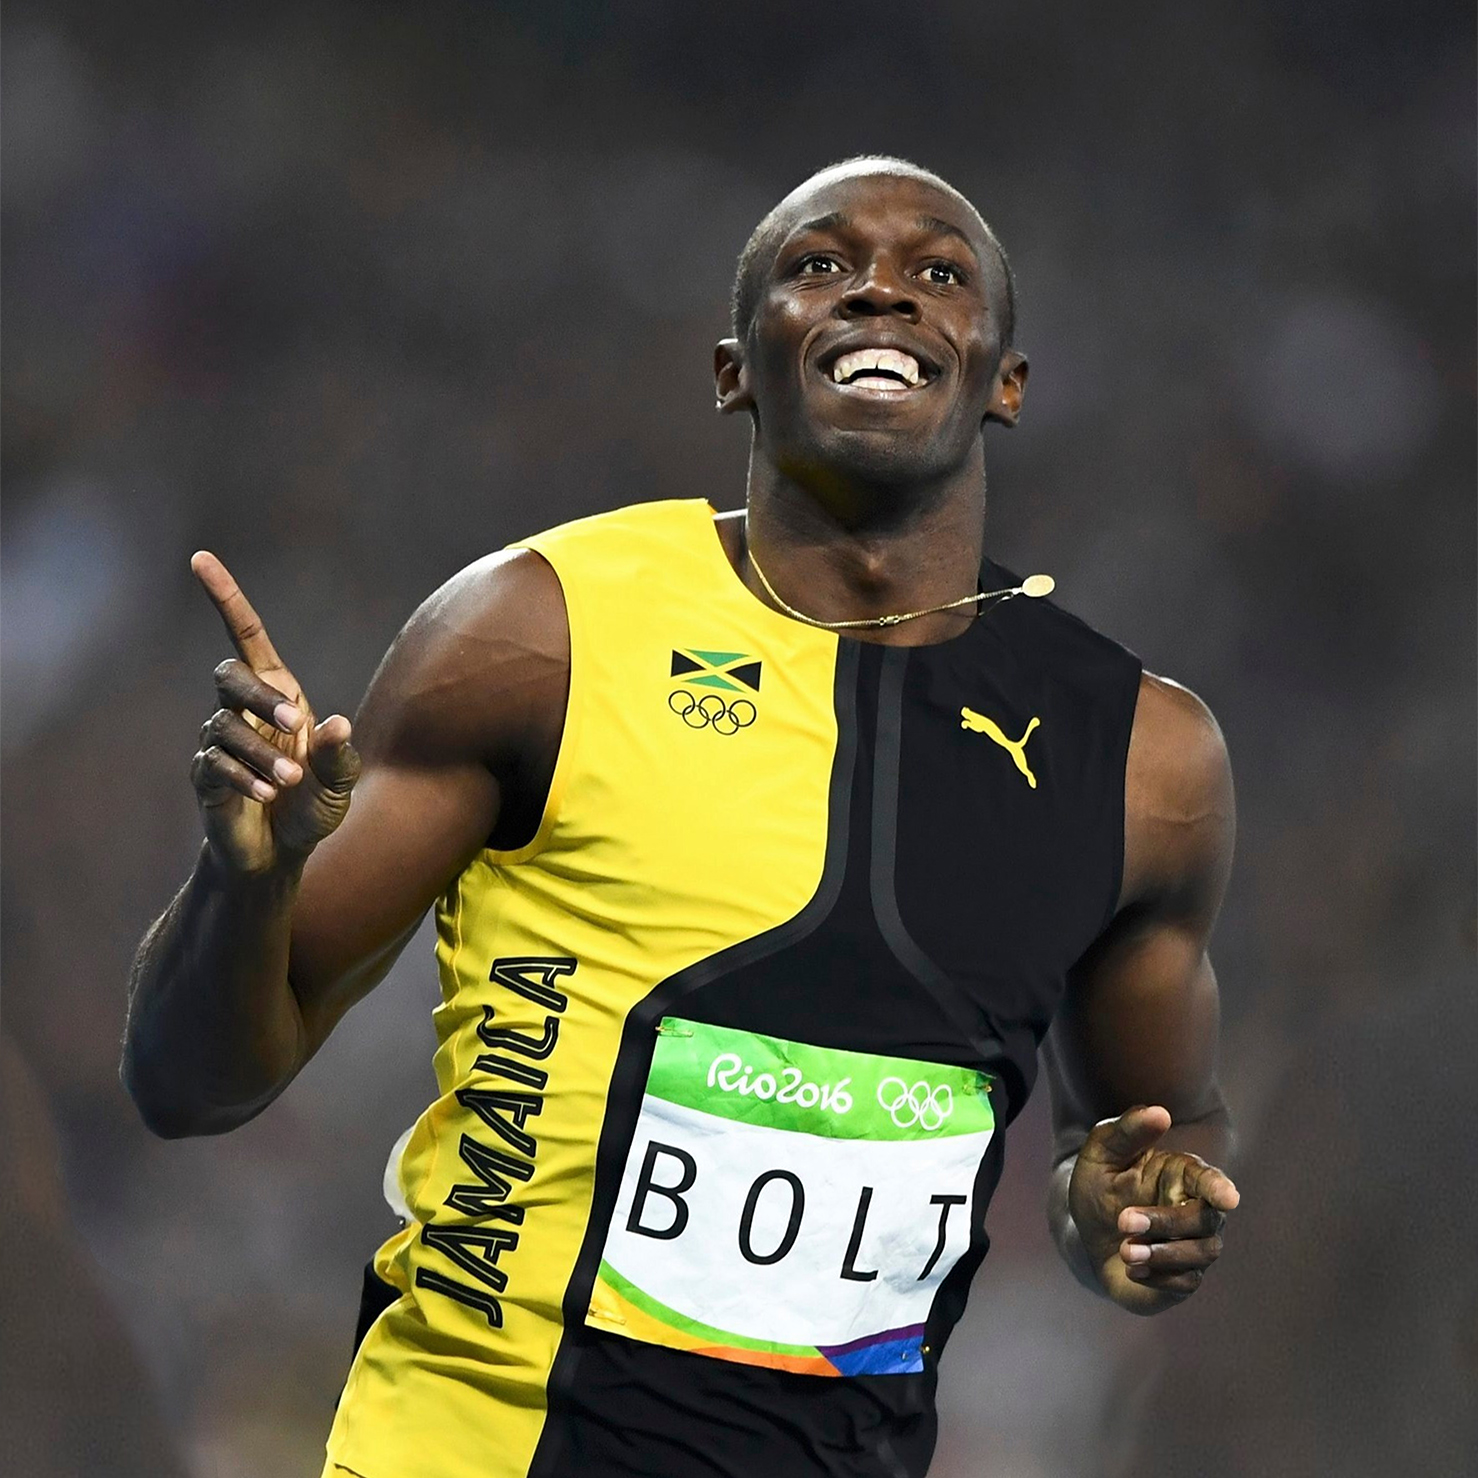 Usain Bolt in self-isolation as he awaits Covid-19 results after his 34th Birthday party